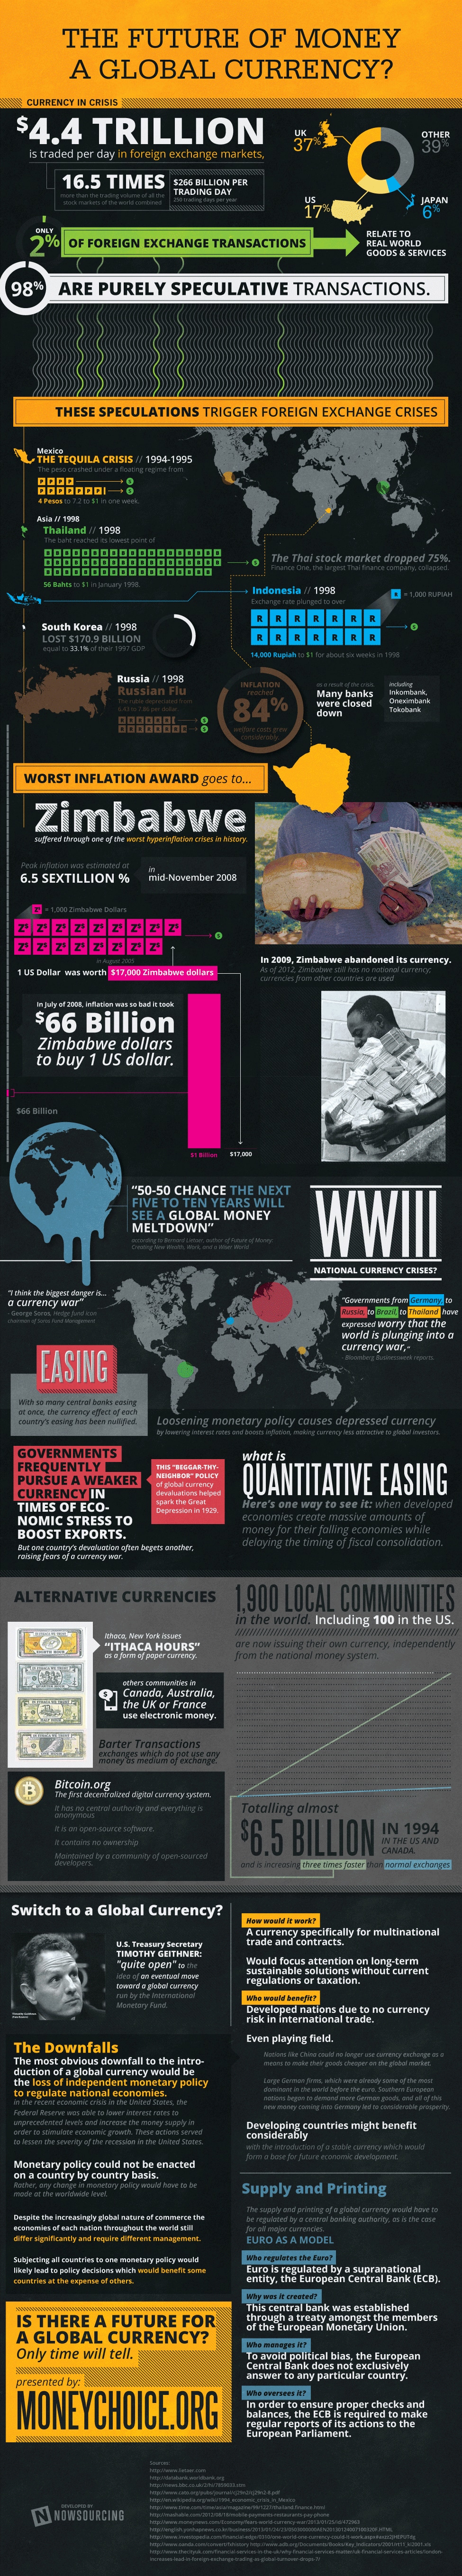 money-globe-global-currency-infographic